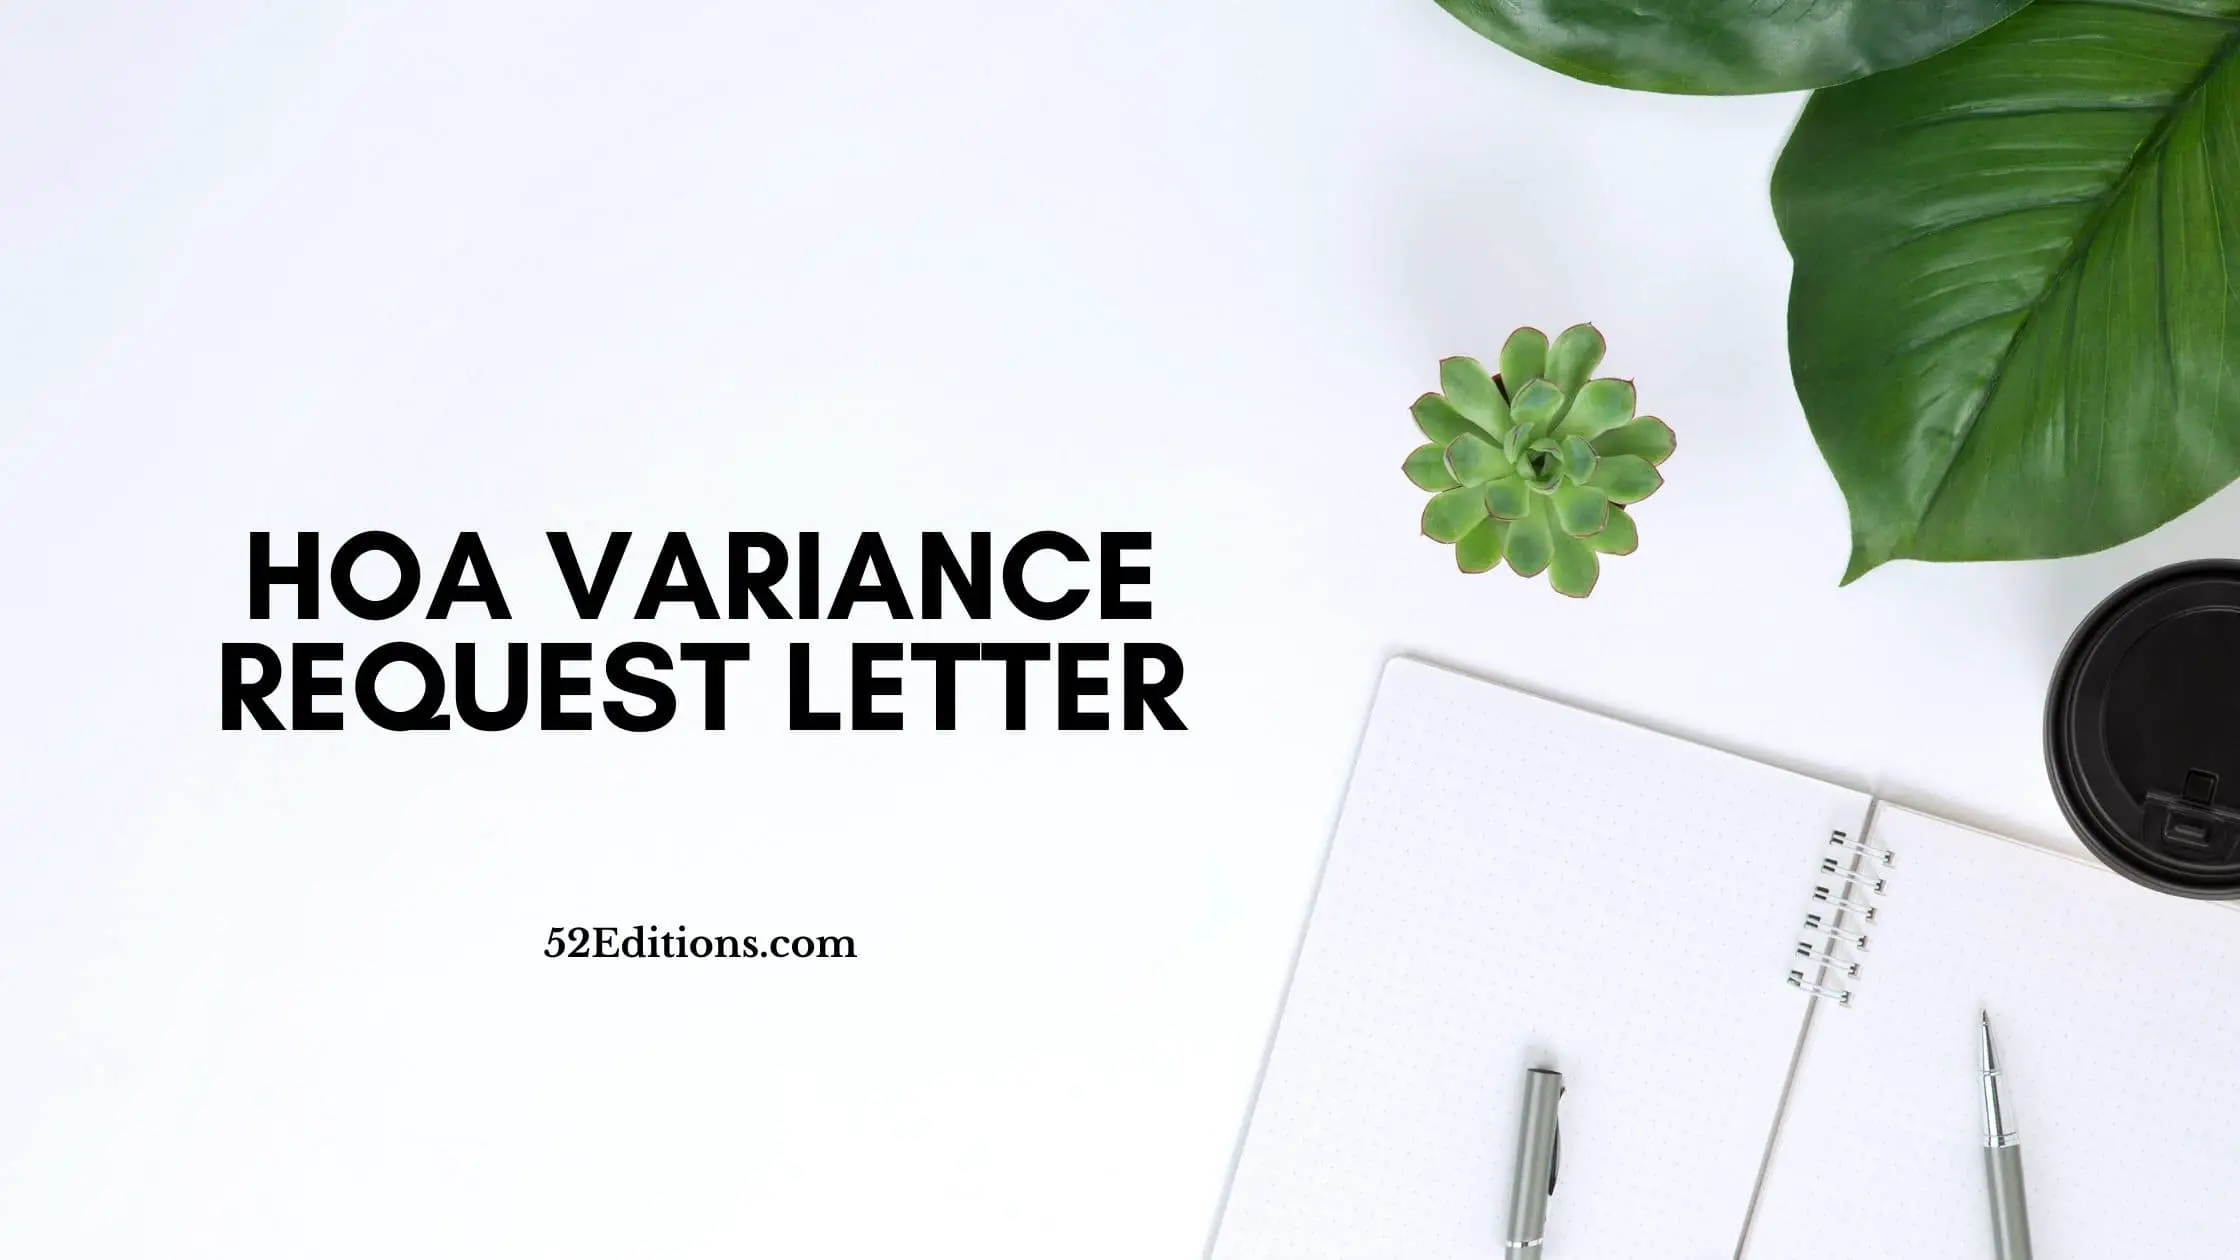 HOA Variance Request Letter // FREE Letter Templates